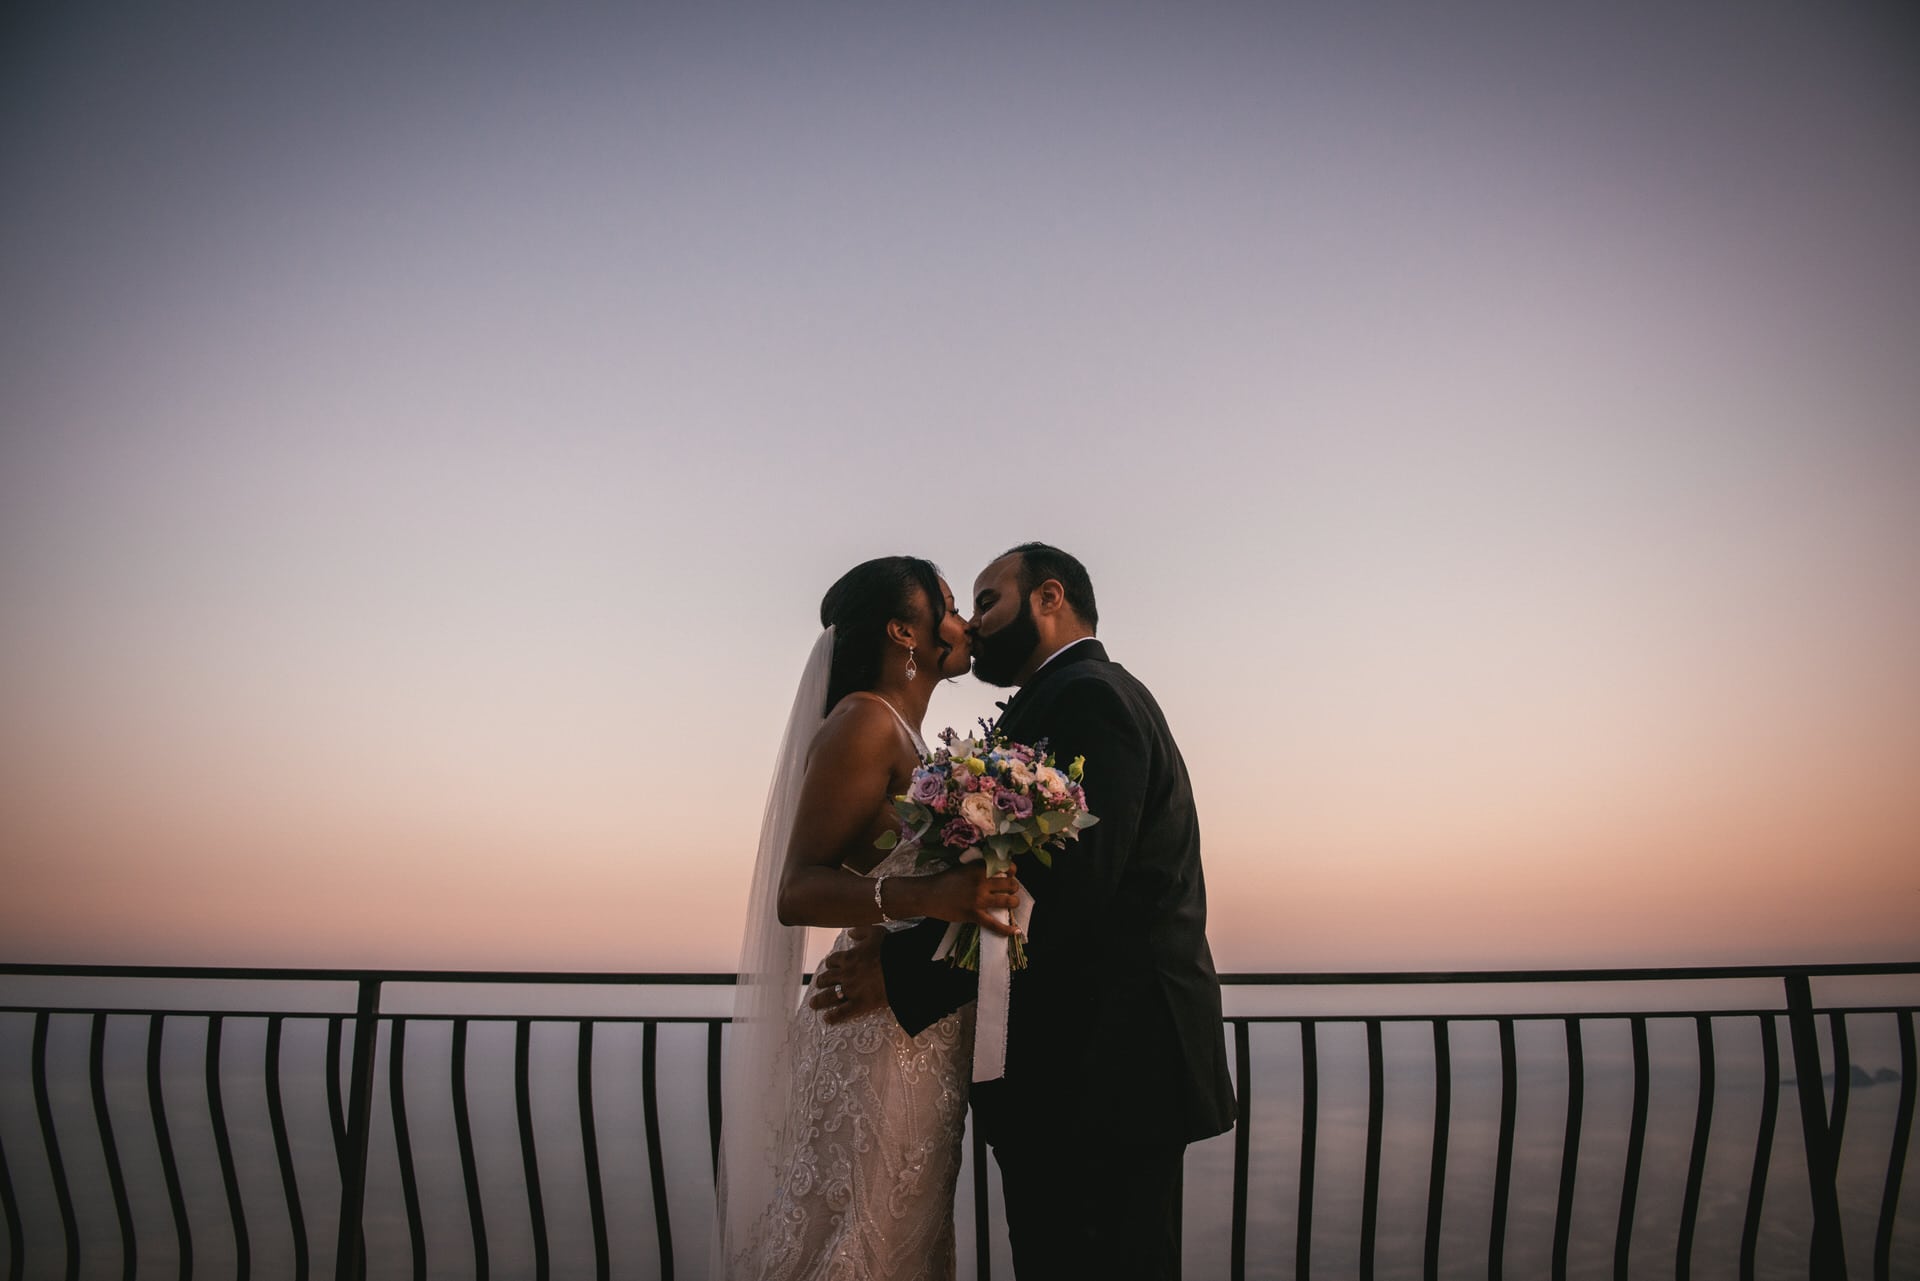 Bride and groom posing for a photoshoot at sunset after their elopement on the Amalfi Coast